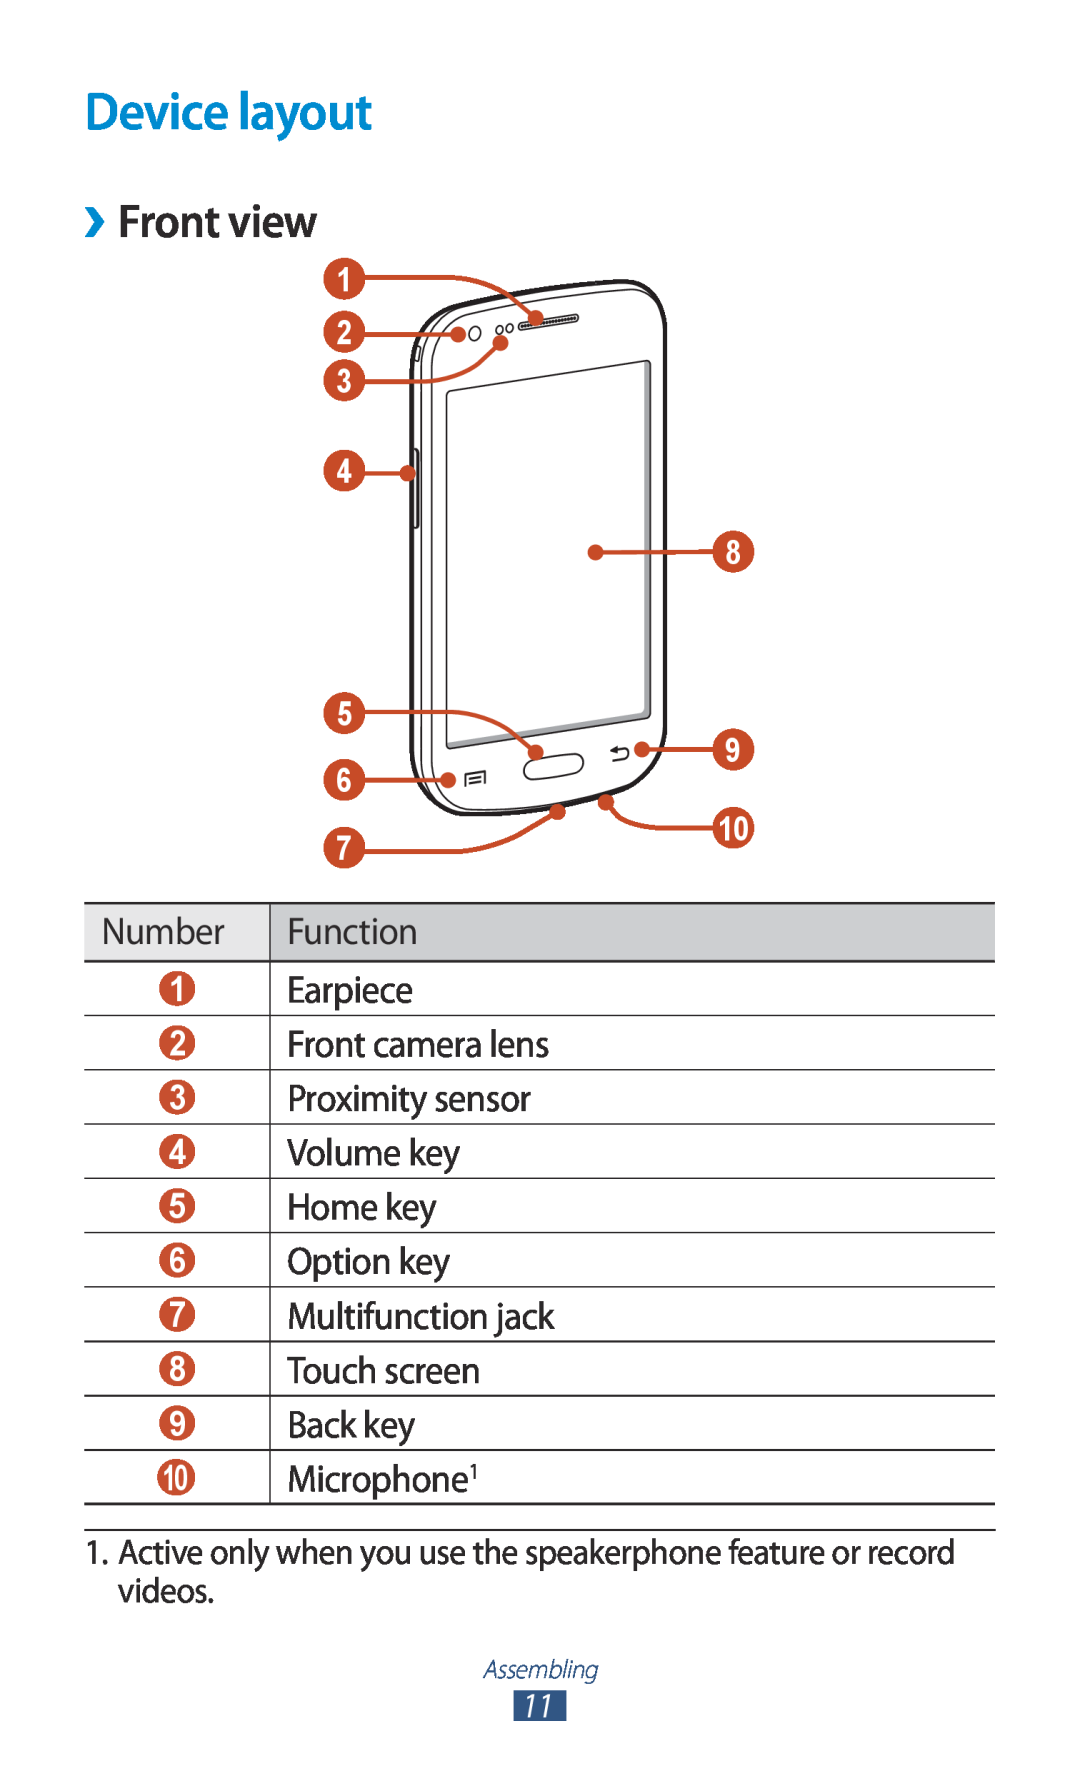 Samsung GT-S7560UWATCL Device layout, ››Front view, Active only when you use the speakerphone feature or record videos 